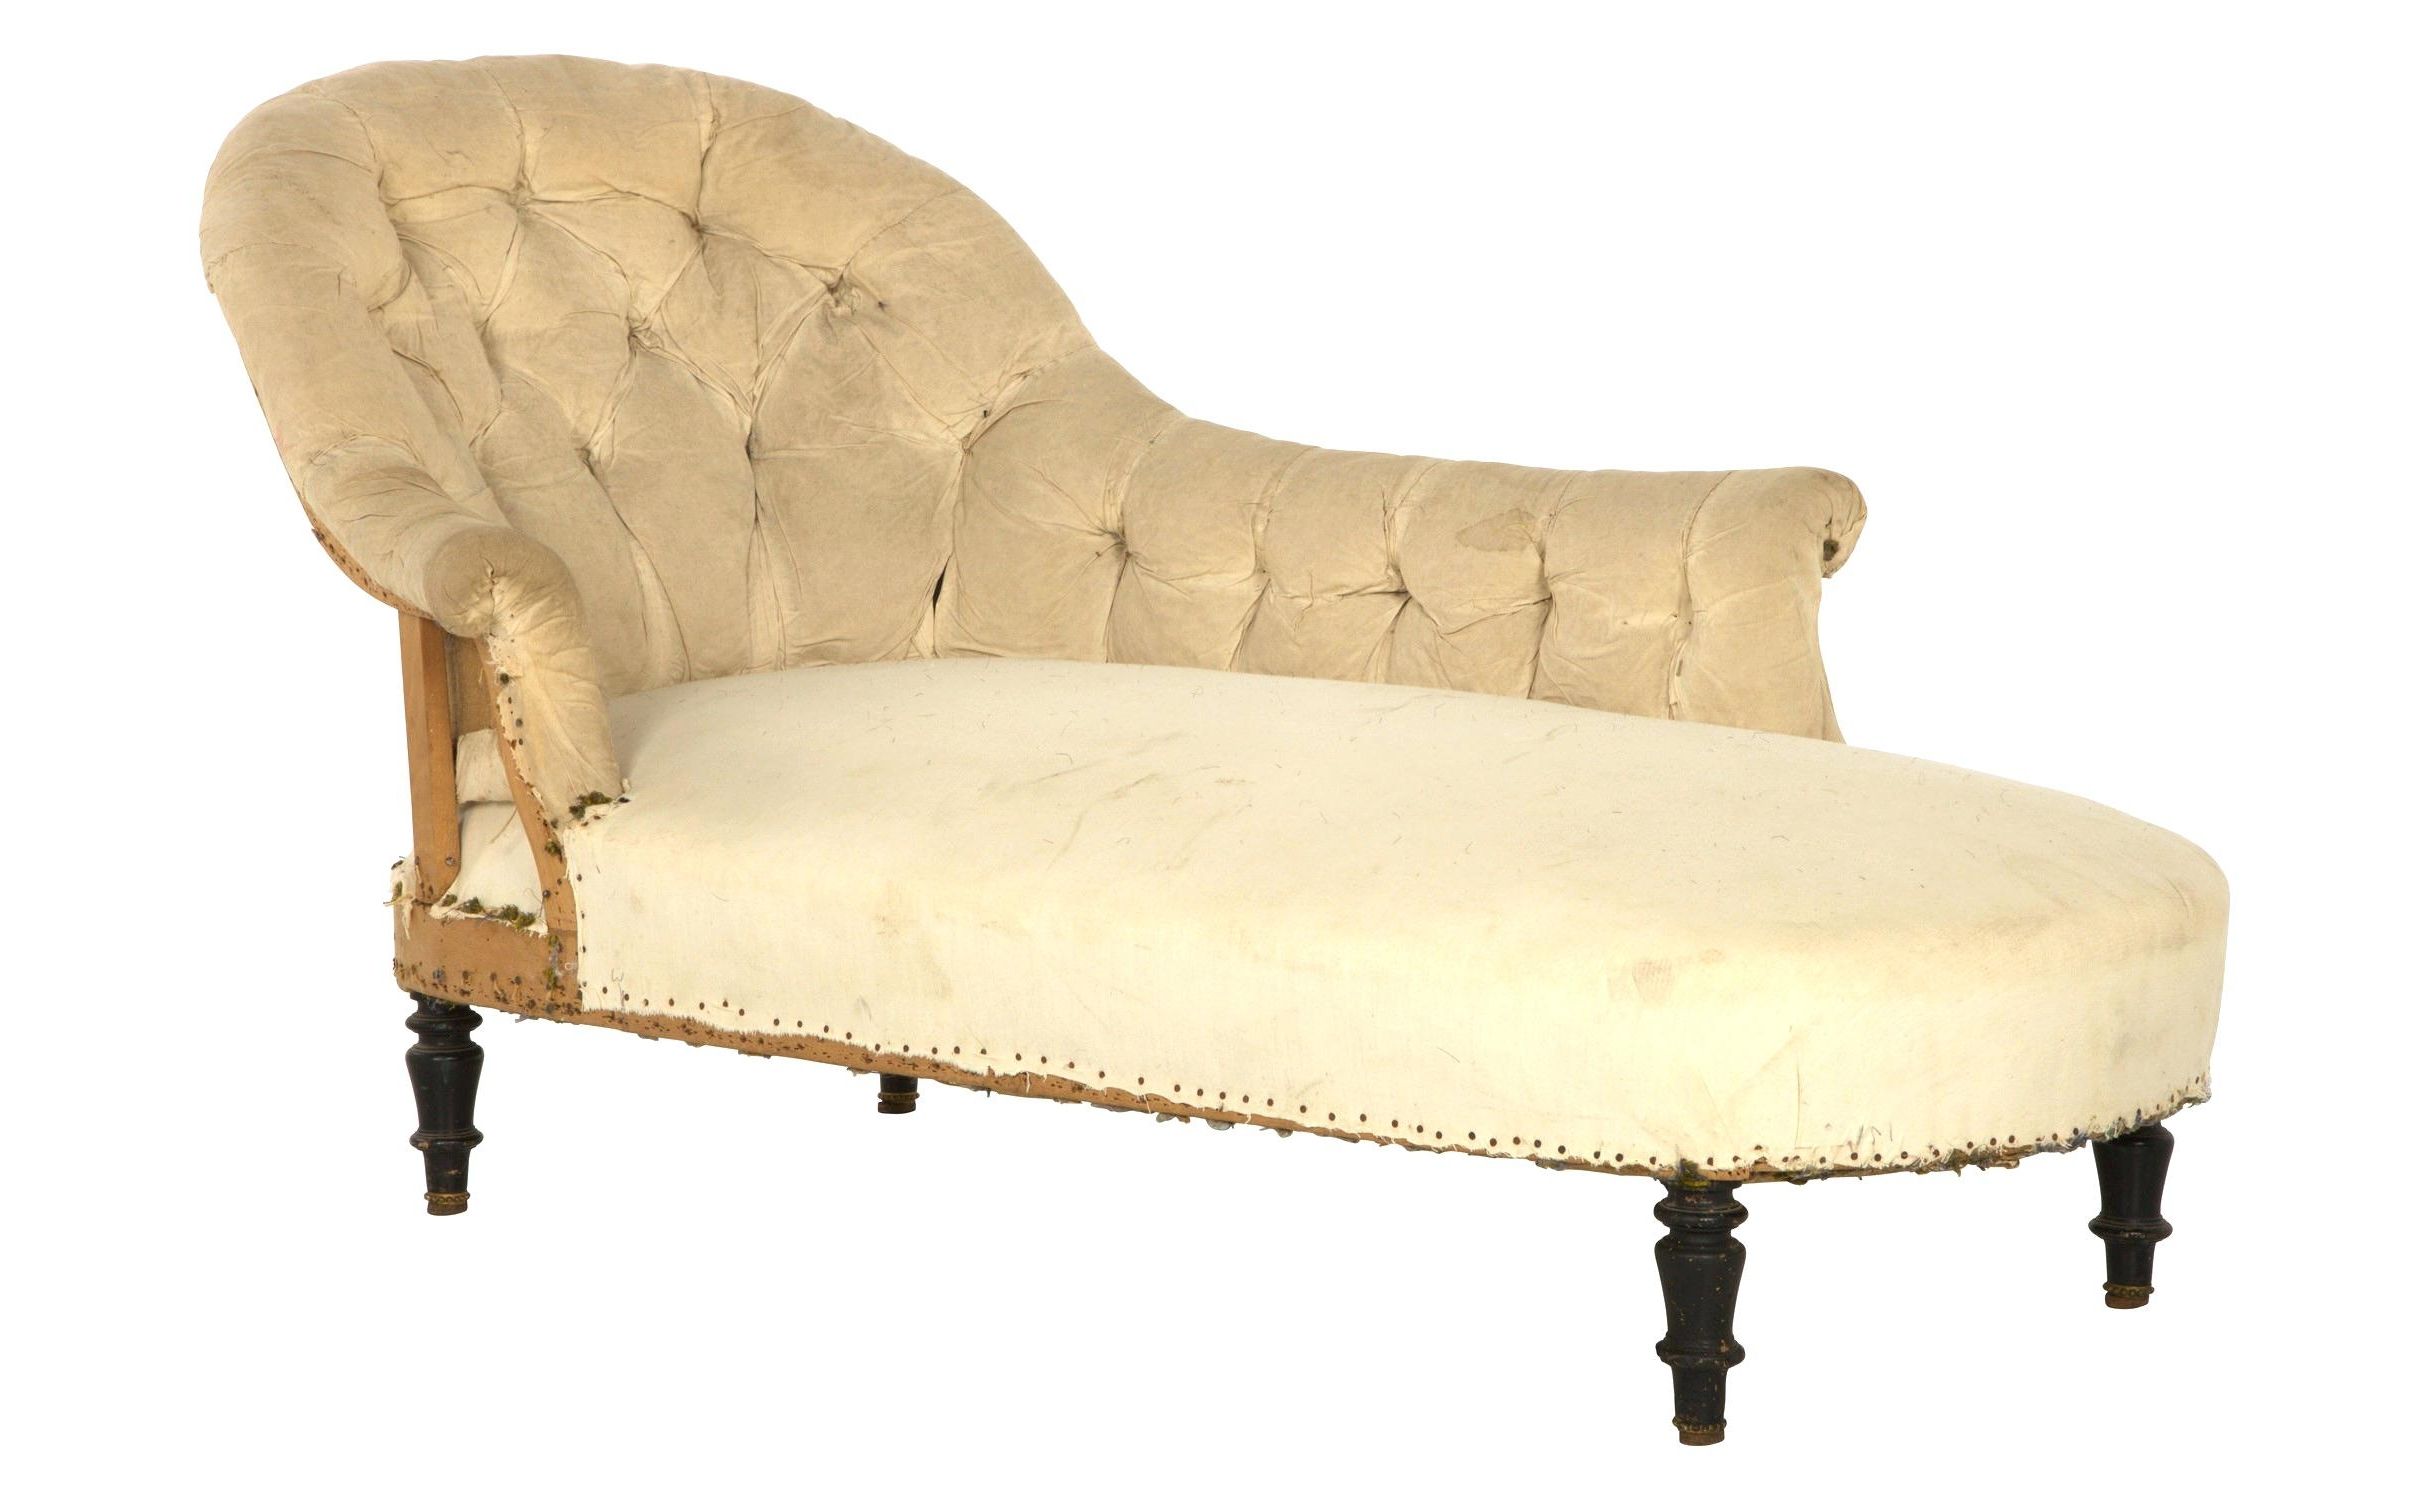 Fashionable Vintage Chaise Lounge Chairs • Lounge Chairs Ideas Regarding Vintage Chaise Lounge Chairs (View 7 of 15)